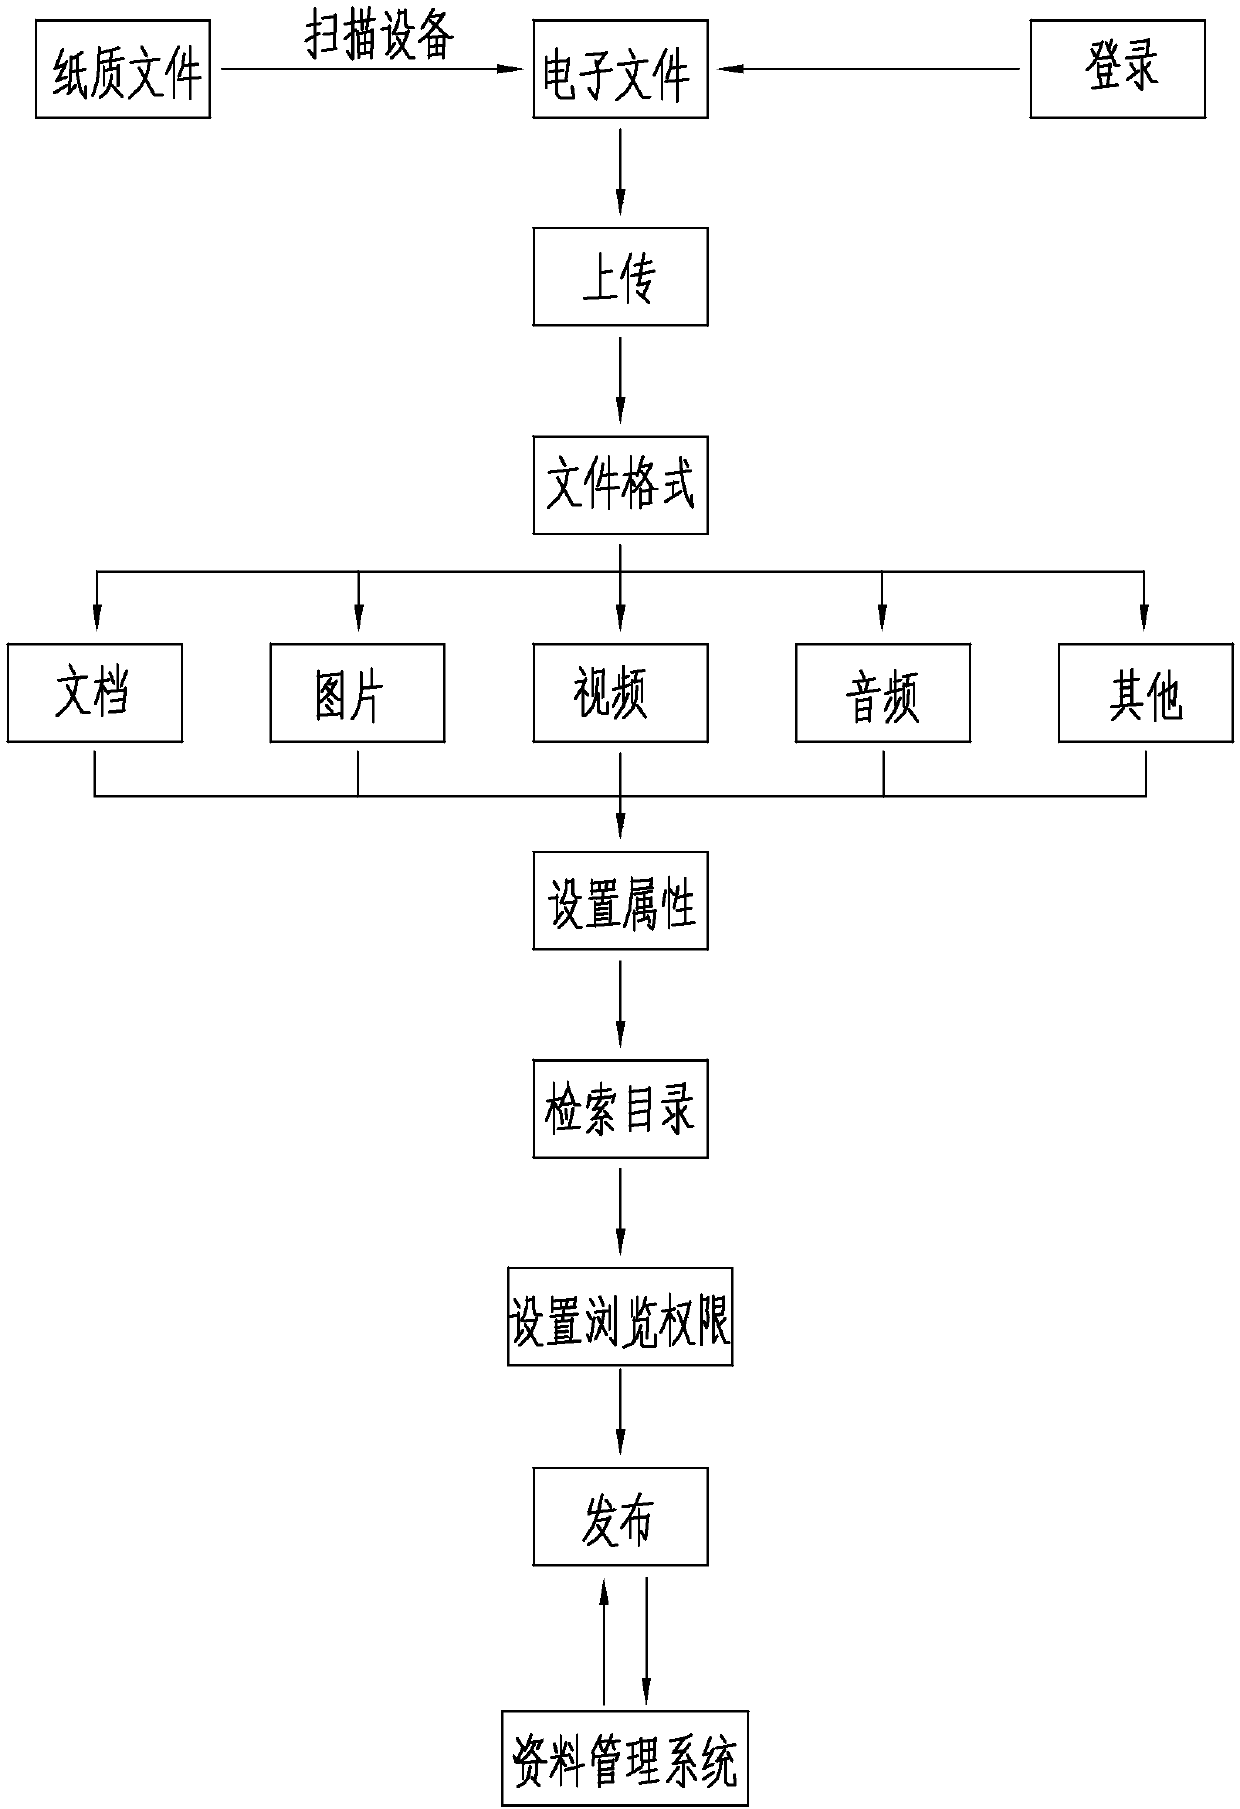 Digital multimedia data management system and method and scanning device